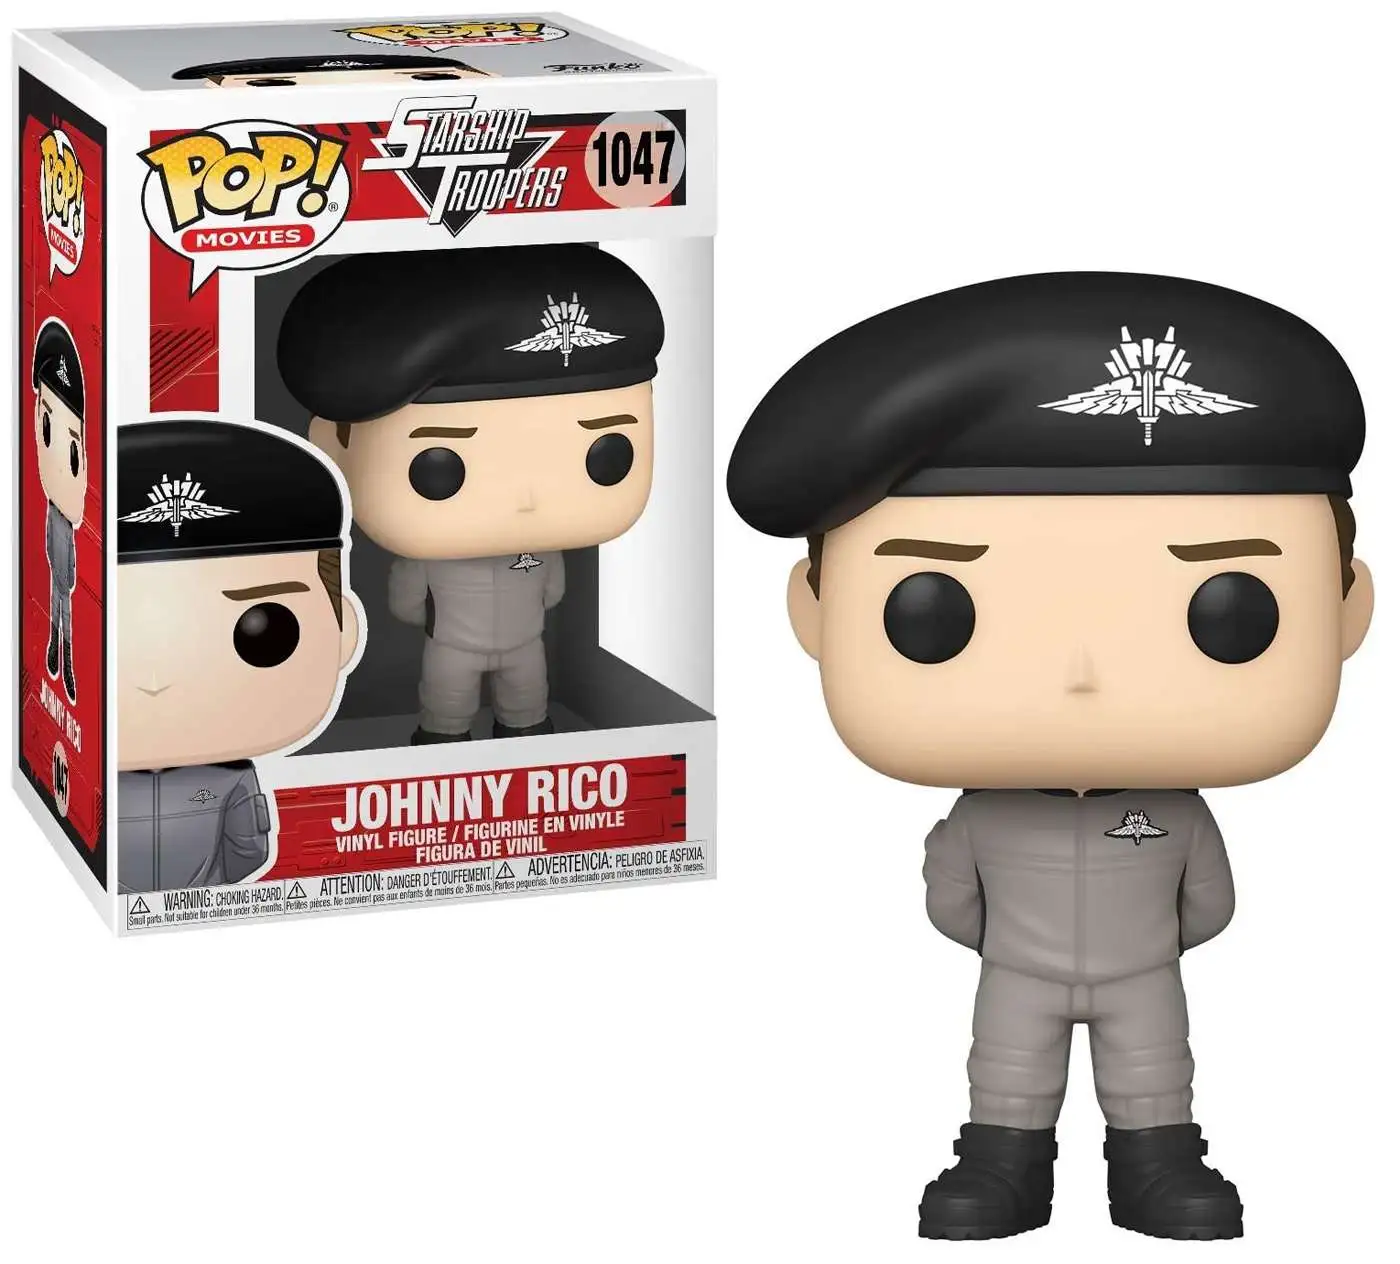 Rico In Jumpsuit Vinyl Figure MOVIES: Starship Troopers FUNKO POP New Toy 